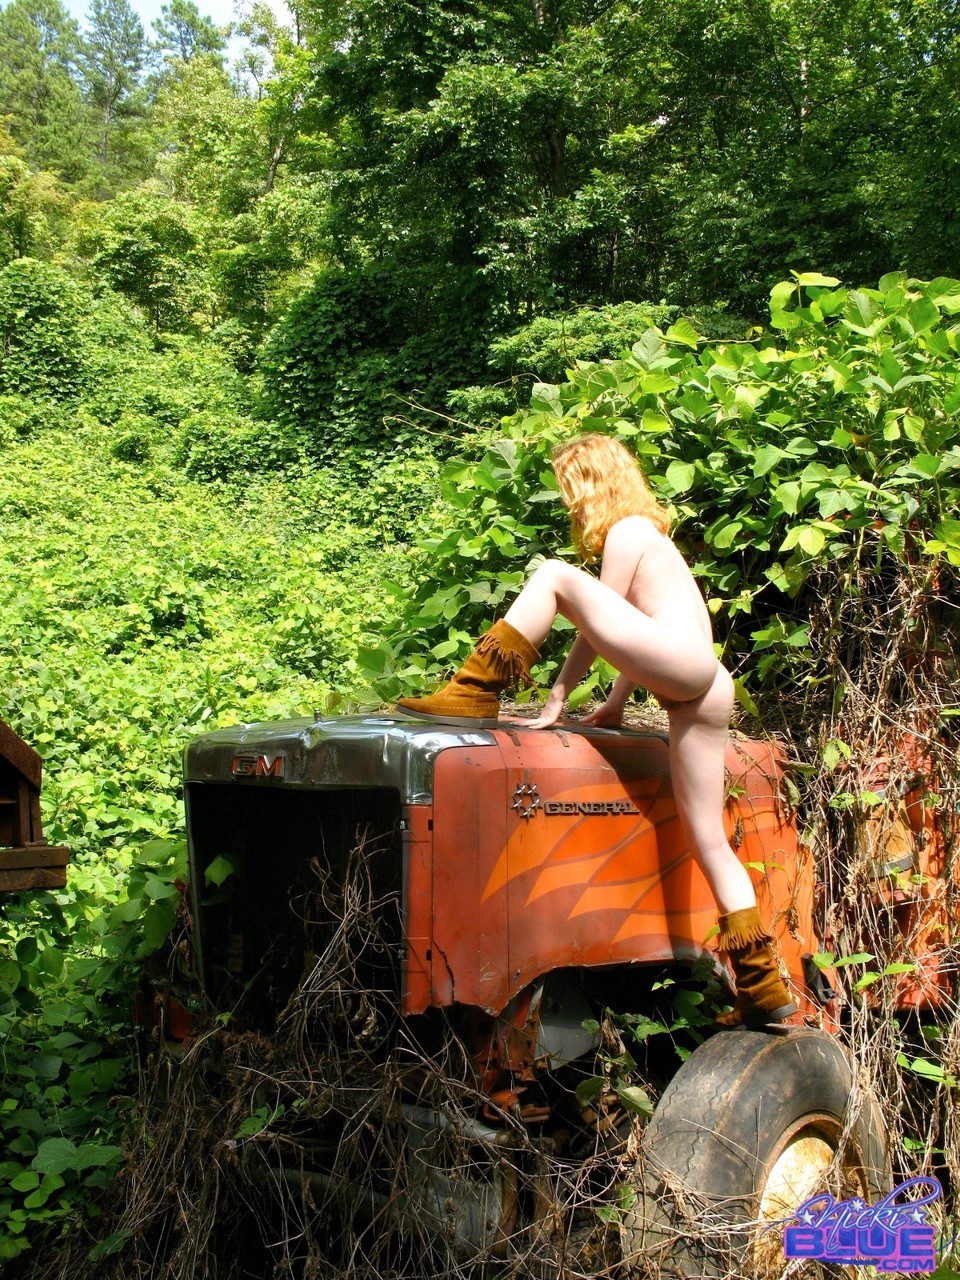 Amateur babe in boots Nicki Blue strips and poses on a tractor in the forest porn photo #424040516 | Pornstar Platinum Pics, Nicki Blue, Outdoor, mobile porn